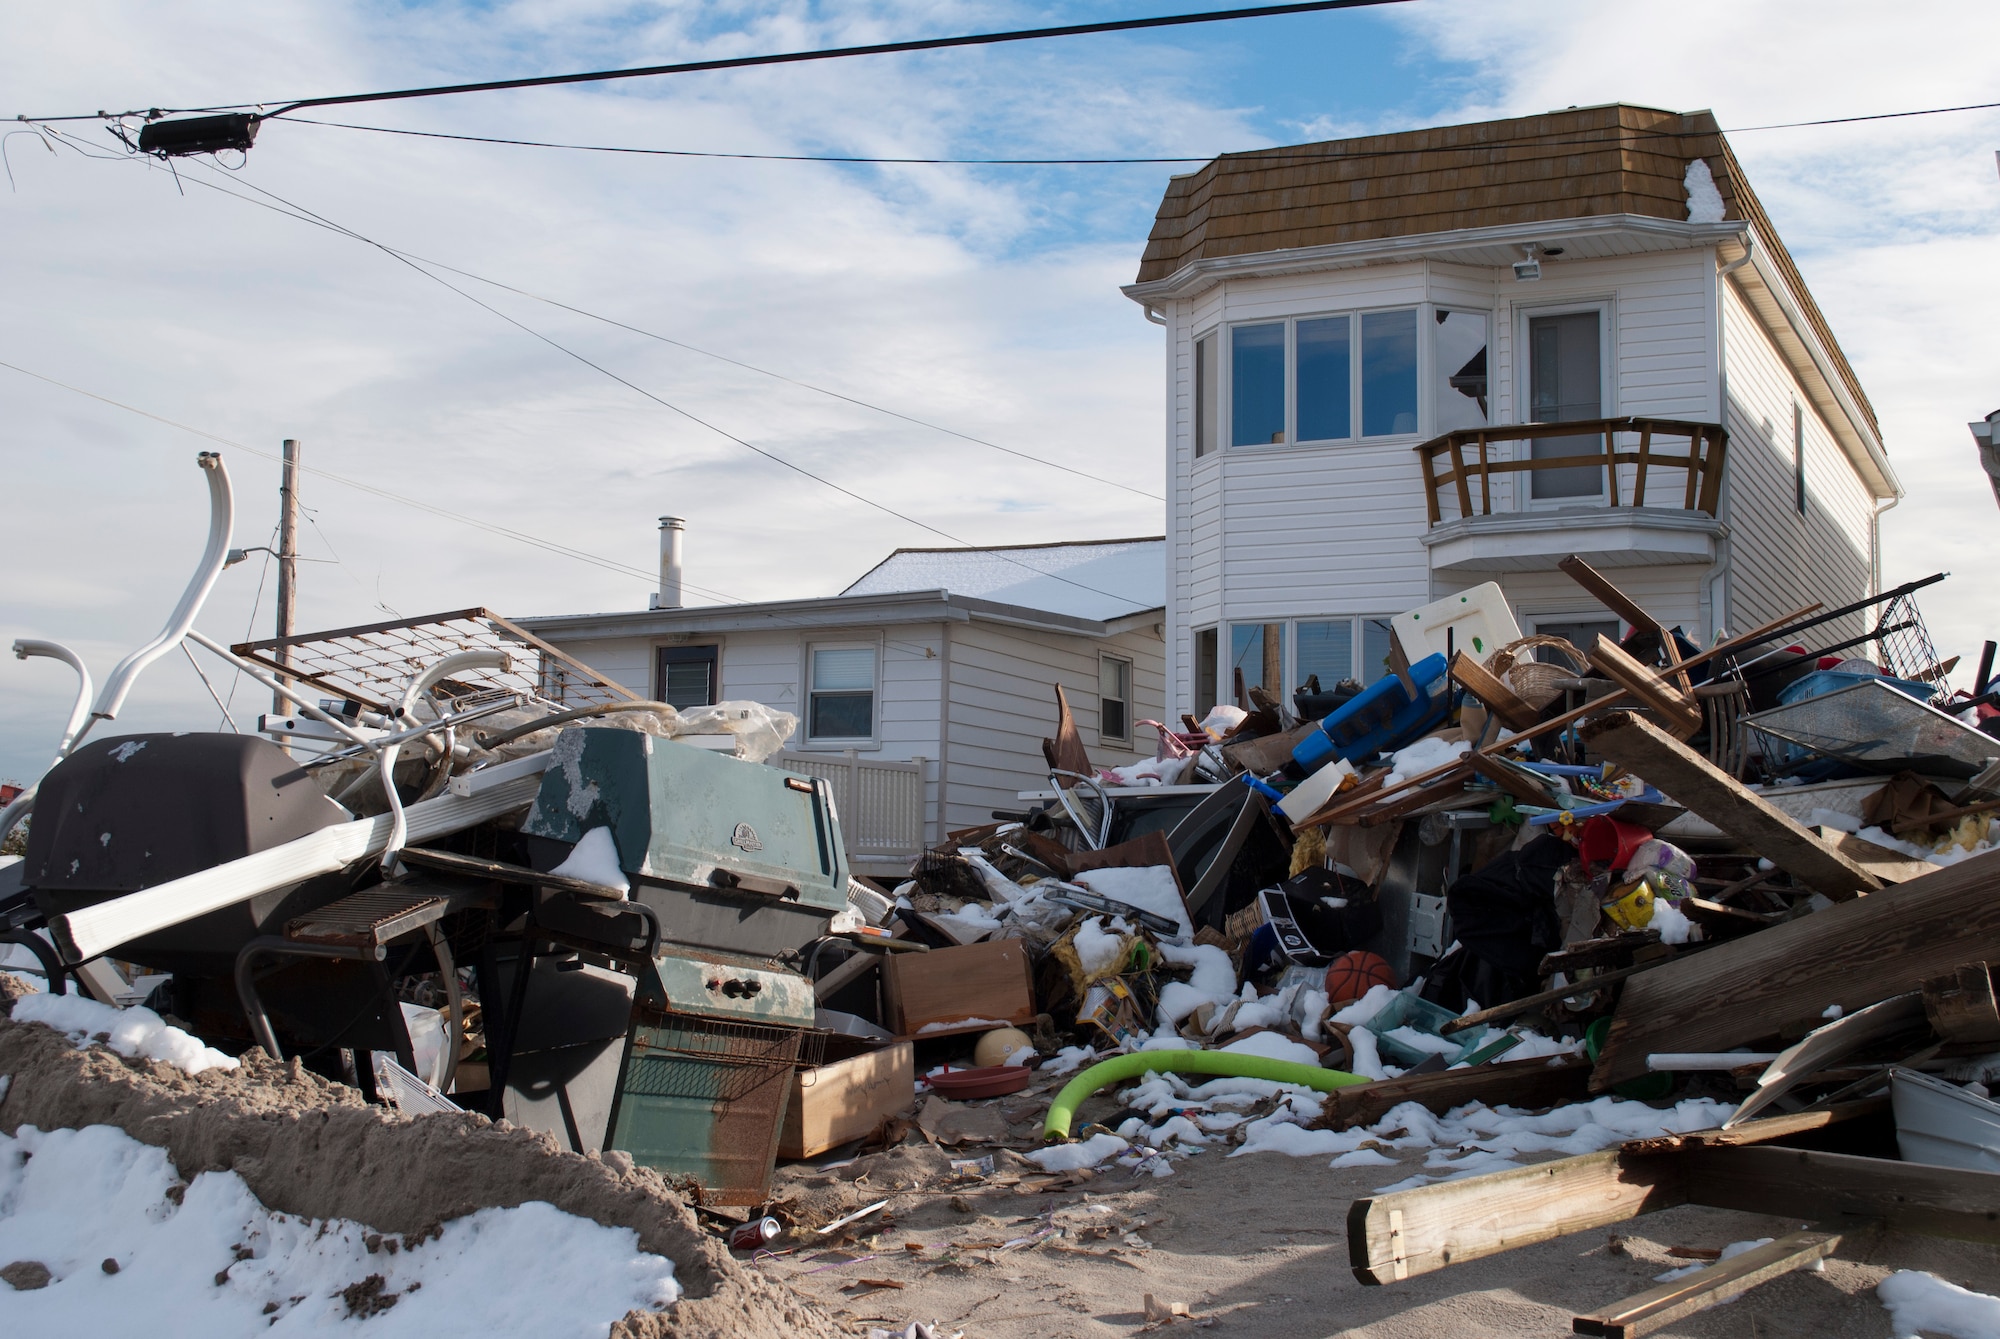 A home destroyed by Hurricane Sandy is covered with debris at Breezy Point, Queens, N.Y., Nov. 8, 2012.  (U.S. Army photo by Sgt. William Adams)